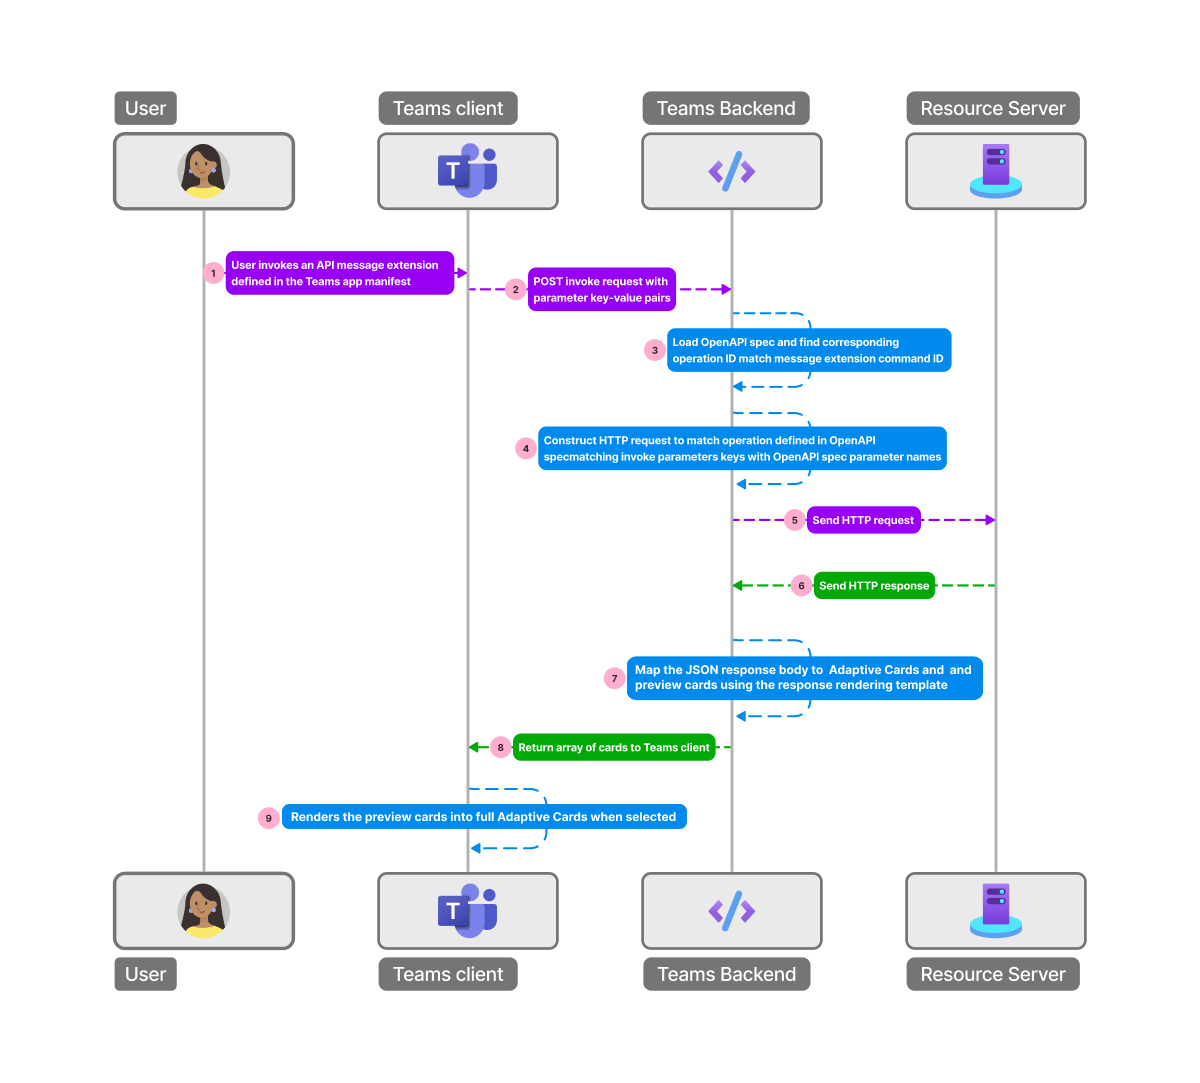 Screenshot shows the OpenAPI description flow from the user to Teams and back to the user.